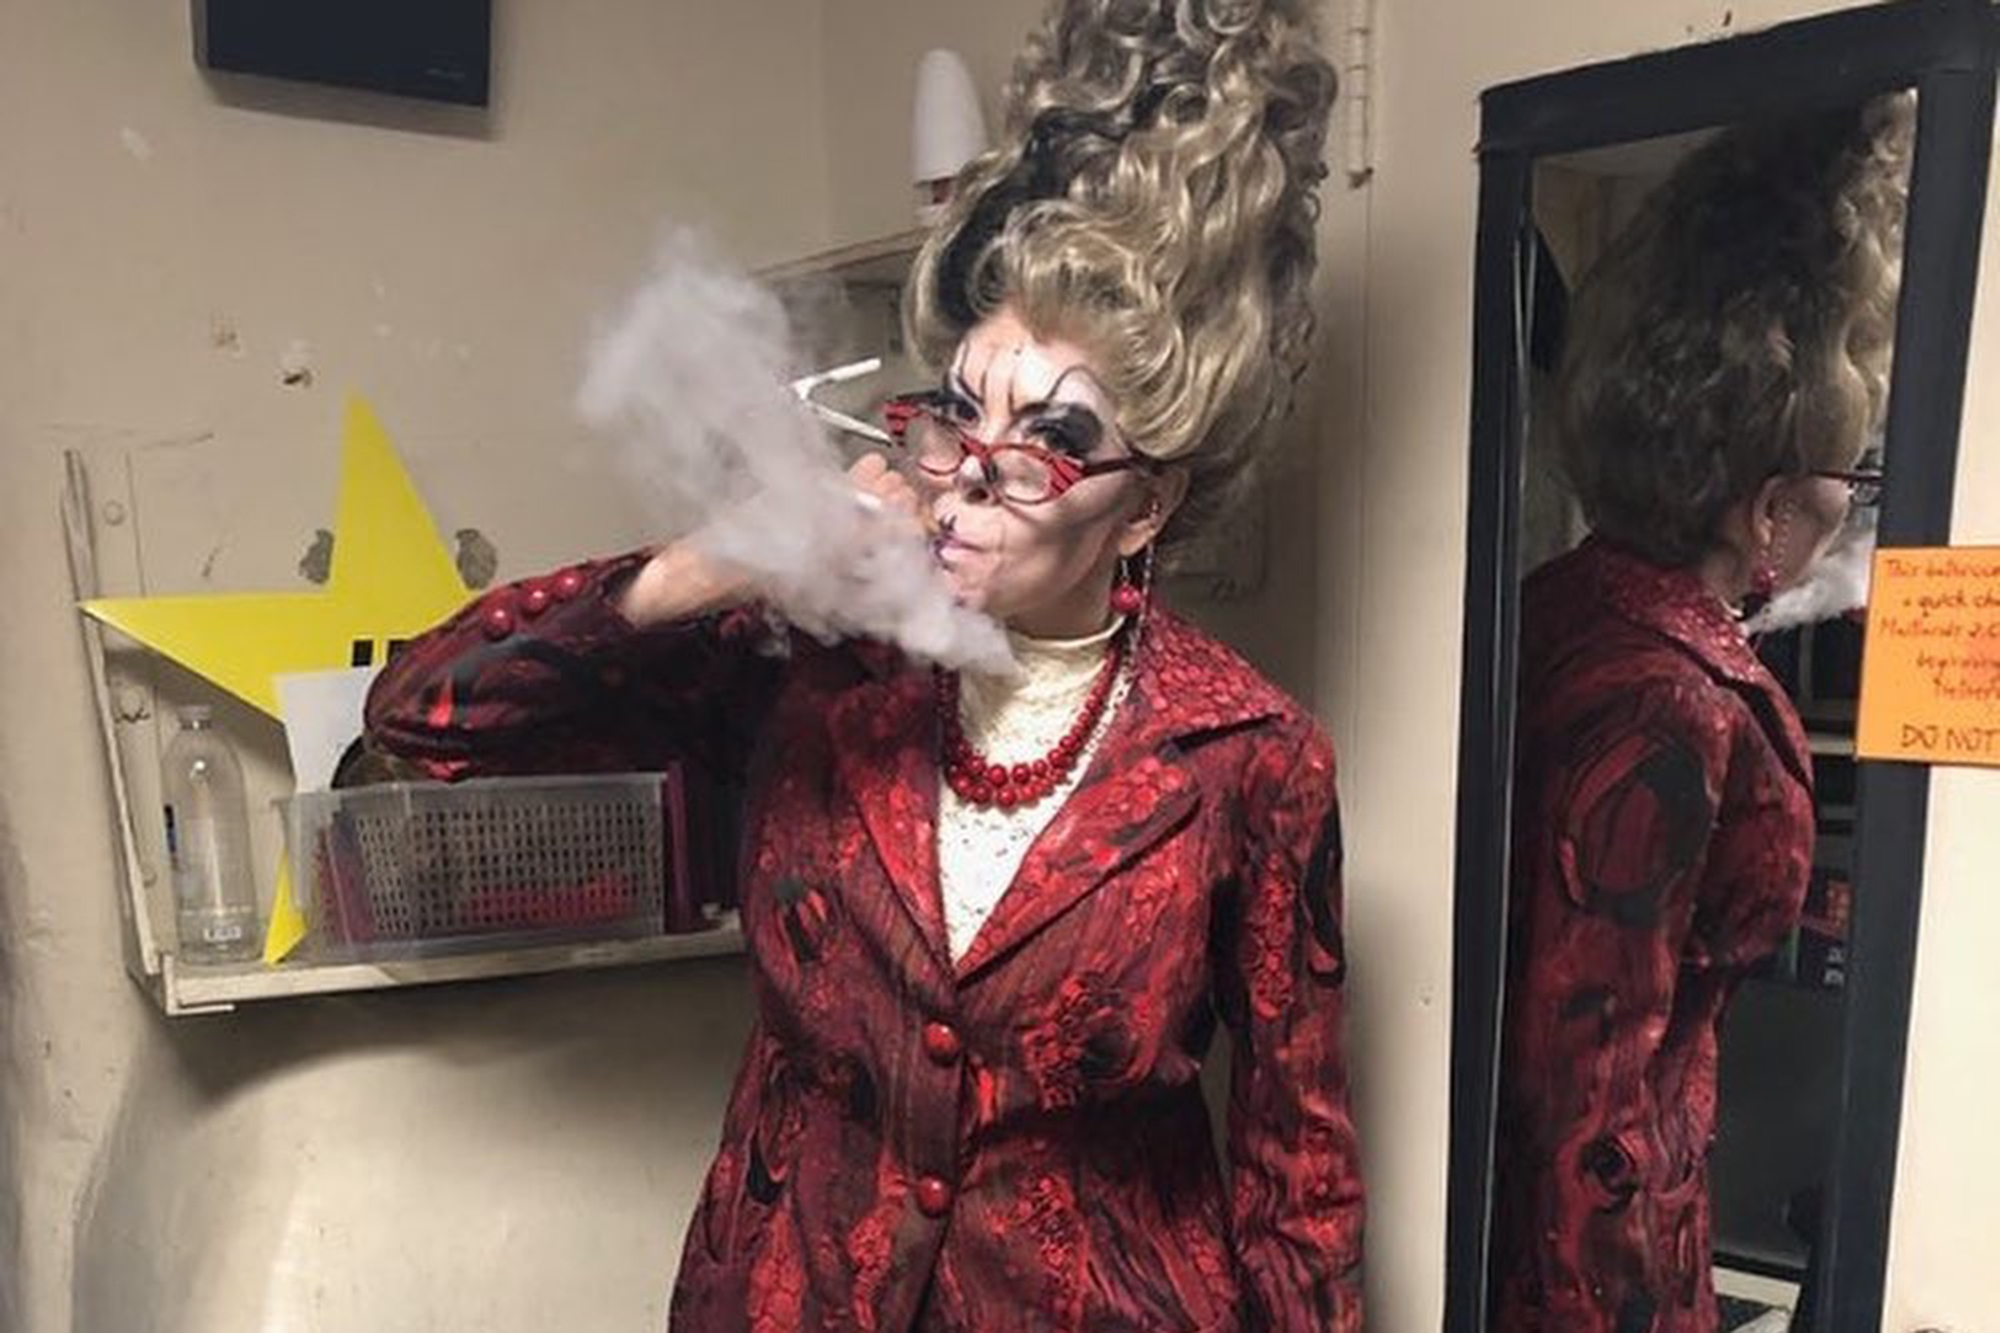 Smoking in theatrical costume with a red blazer and pearls